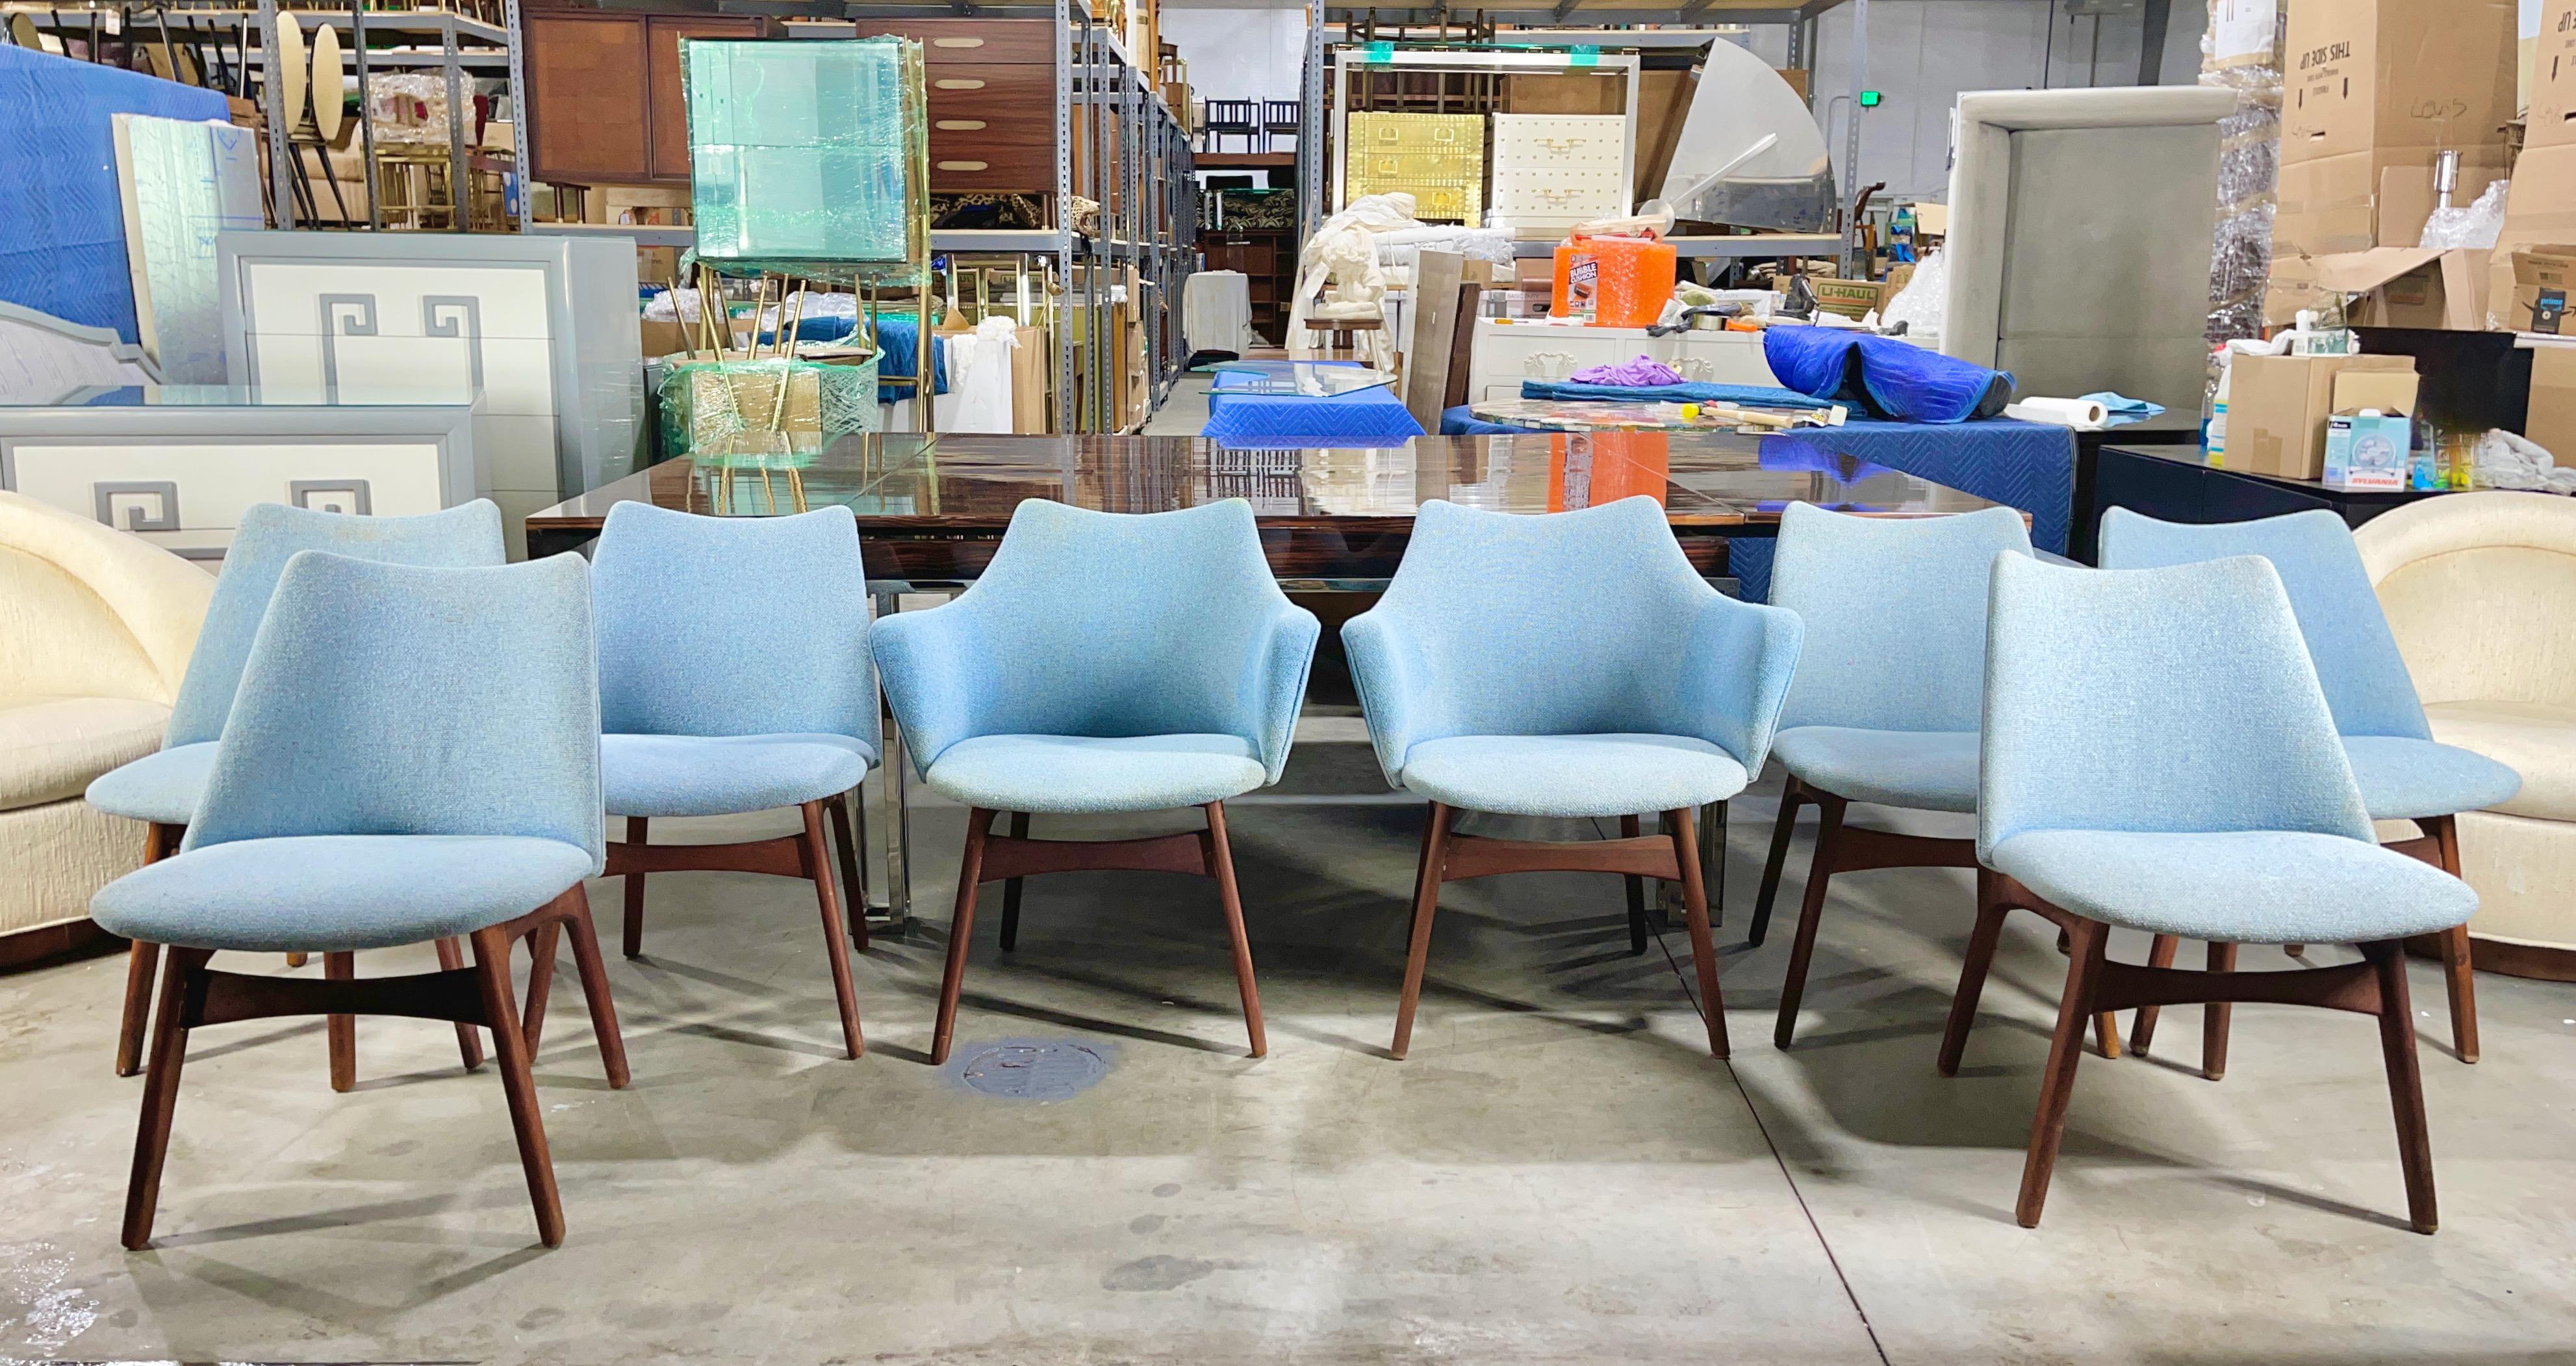 Set of eight dining chairs designed by Adrian Pearsall for Craft Associates in 1969, polyfoam over moulded plywood seat and back on sculptural walnut frames, presented in their original blue (clean but faded) nubby wool upholstery.
Two captains